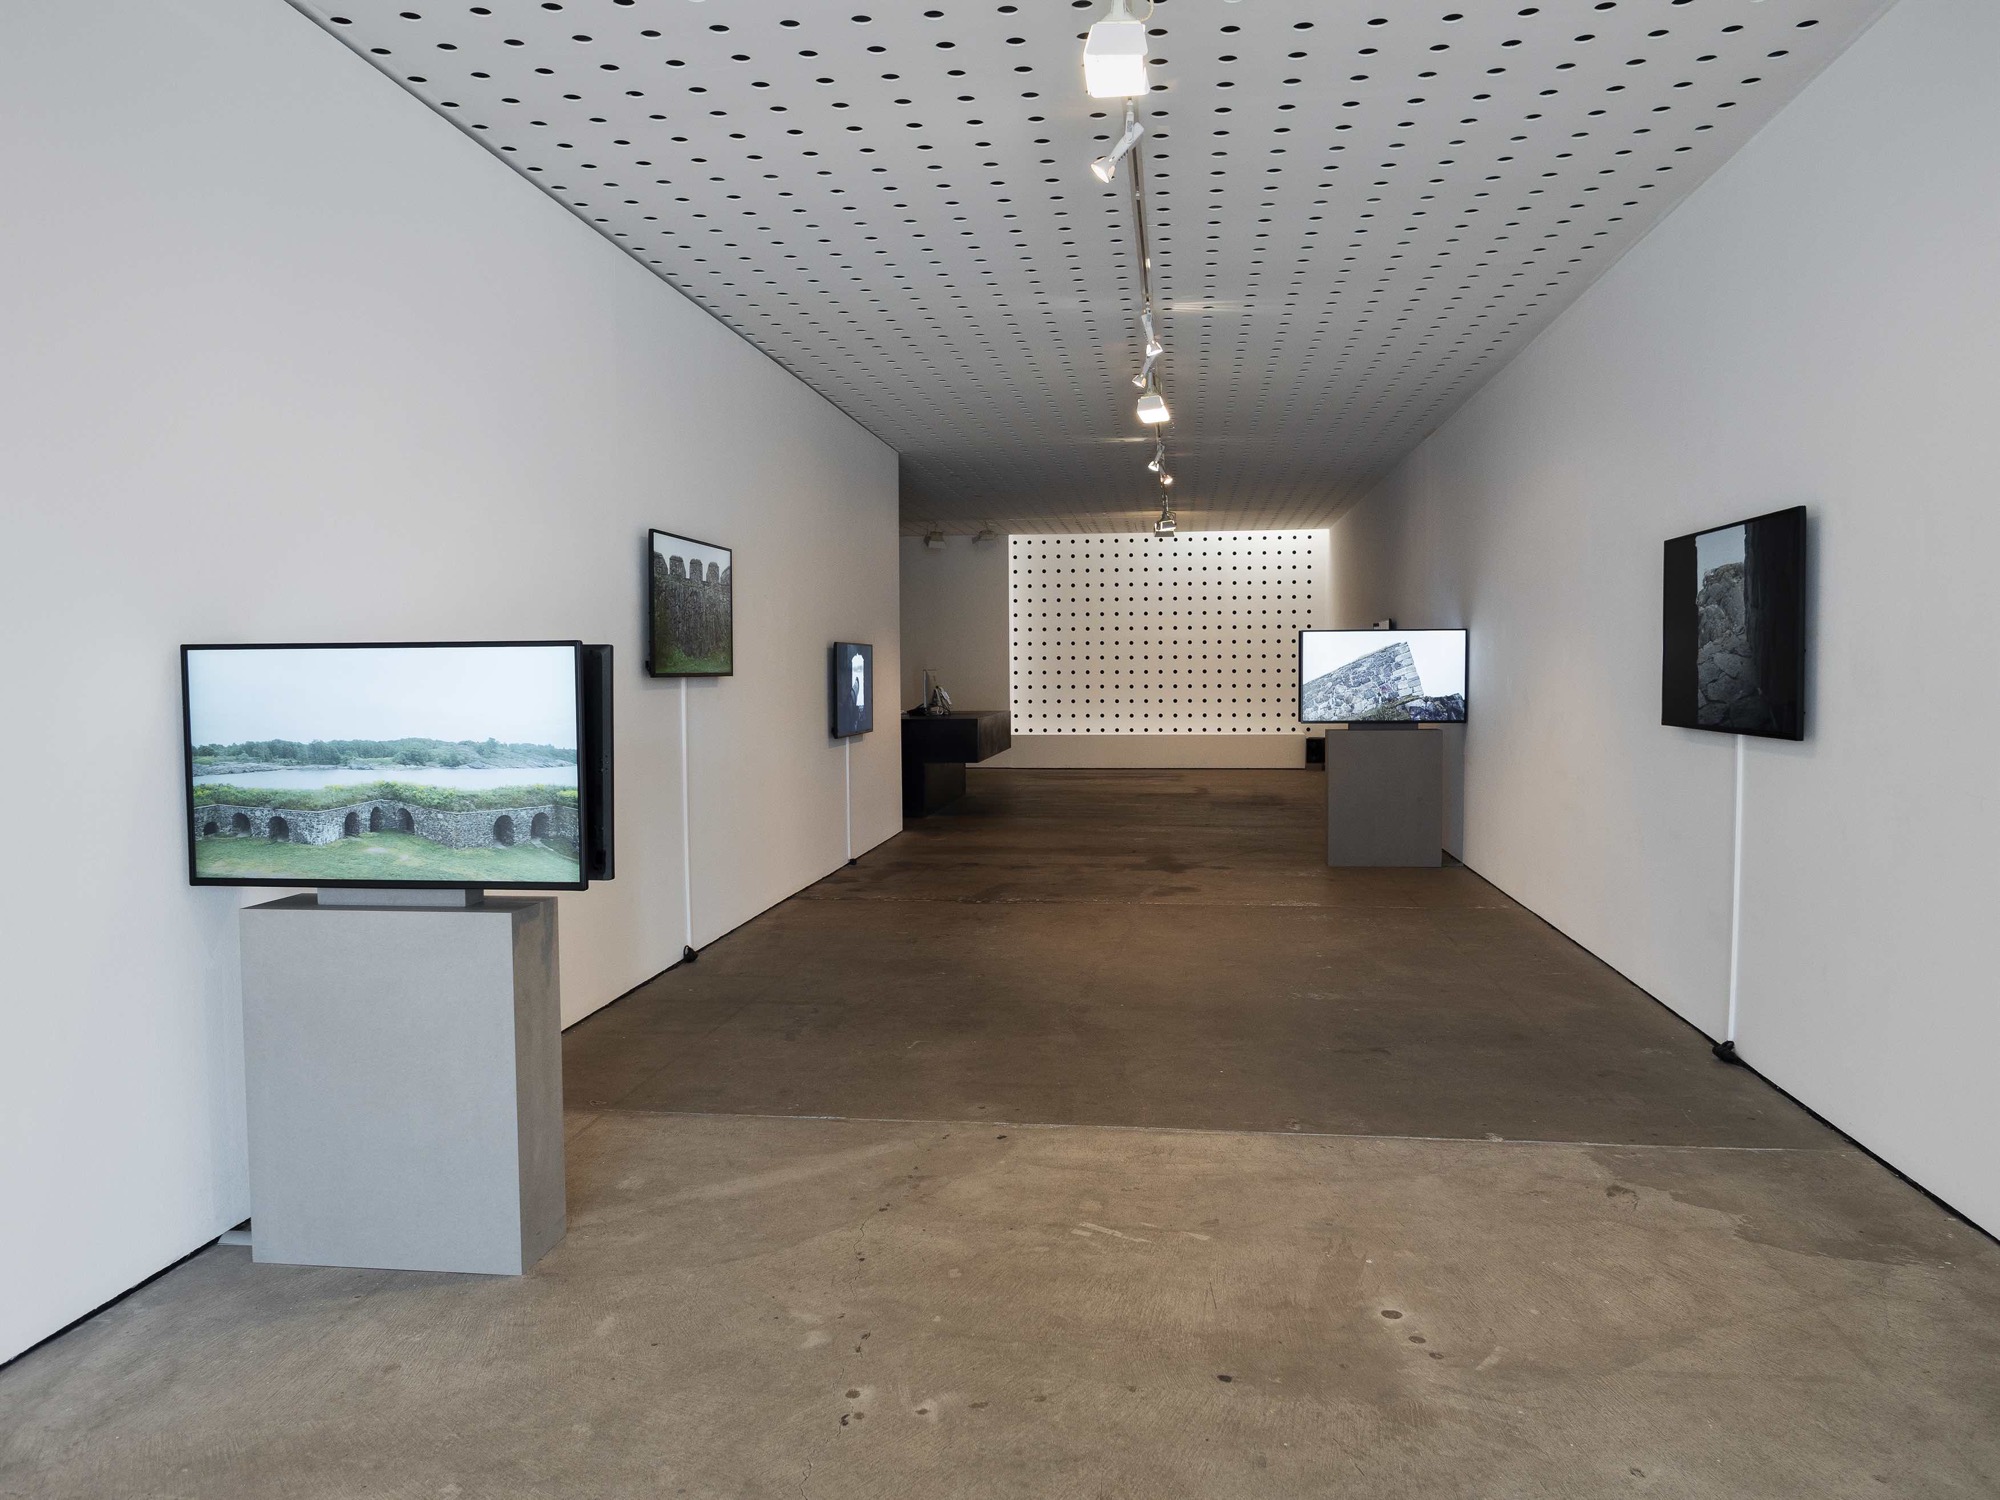 Sonia Leber &amp; David Chesworth, <em>Geography Becomes Territory Becomes</em>, 2018. 8-channel HD video installation, non-sync playback, stereo audio, 14 minutes. Installation view at Centre for Contemporary Photography, Melbourne <strong>.</strong> Courtesy the artists. This project has been supported by an Australia Council funded residency at Helsinki International Artist Program and a NAVA Visual Arts Fellowship supported by Copyright Agency&#39;s Cultural Fund. Commissioned by Centre for Contemporary Photography, Melbourne.